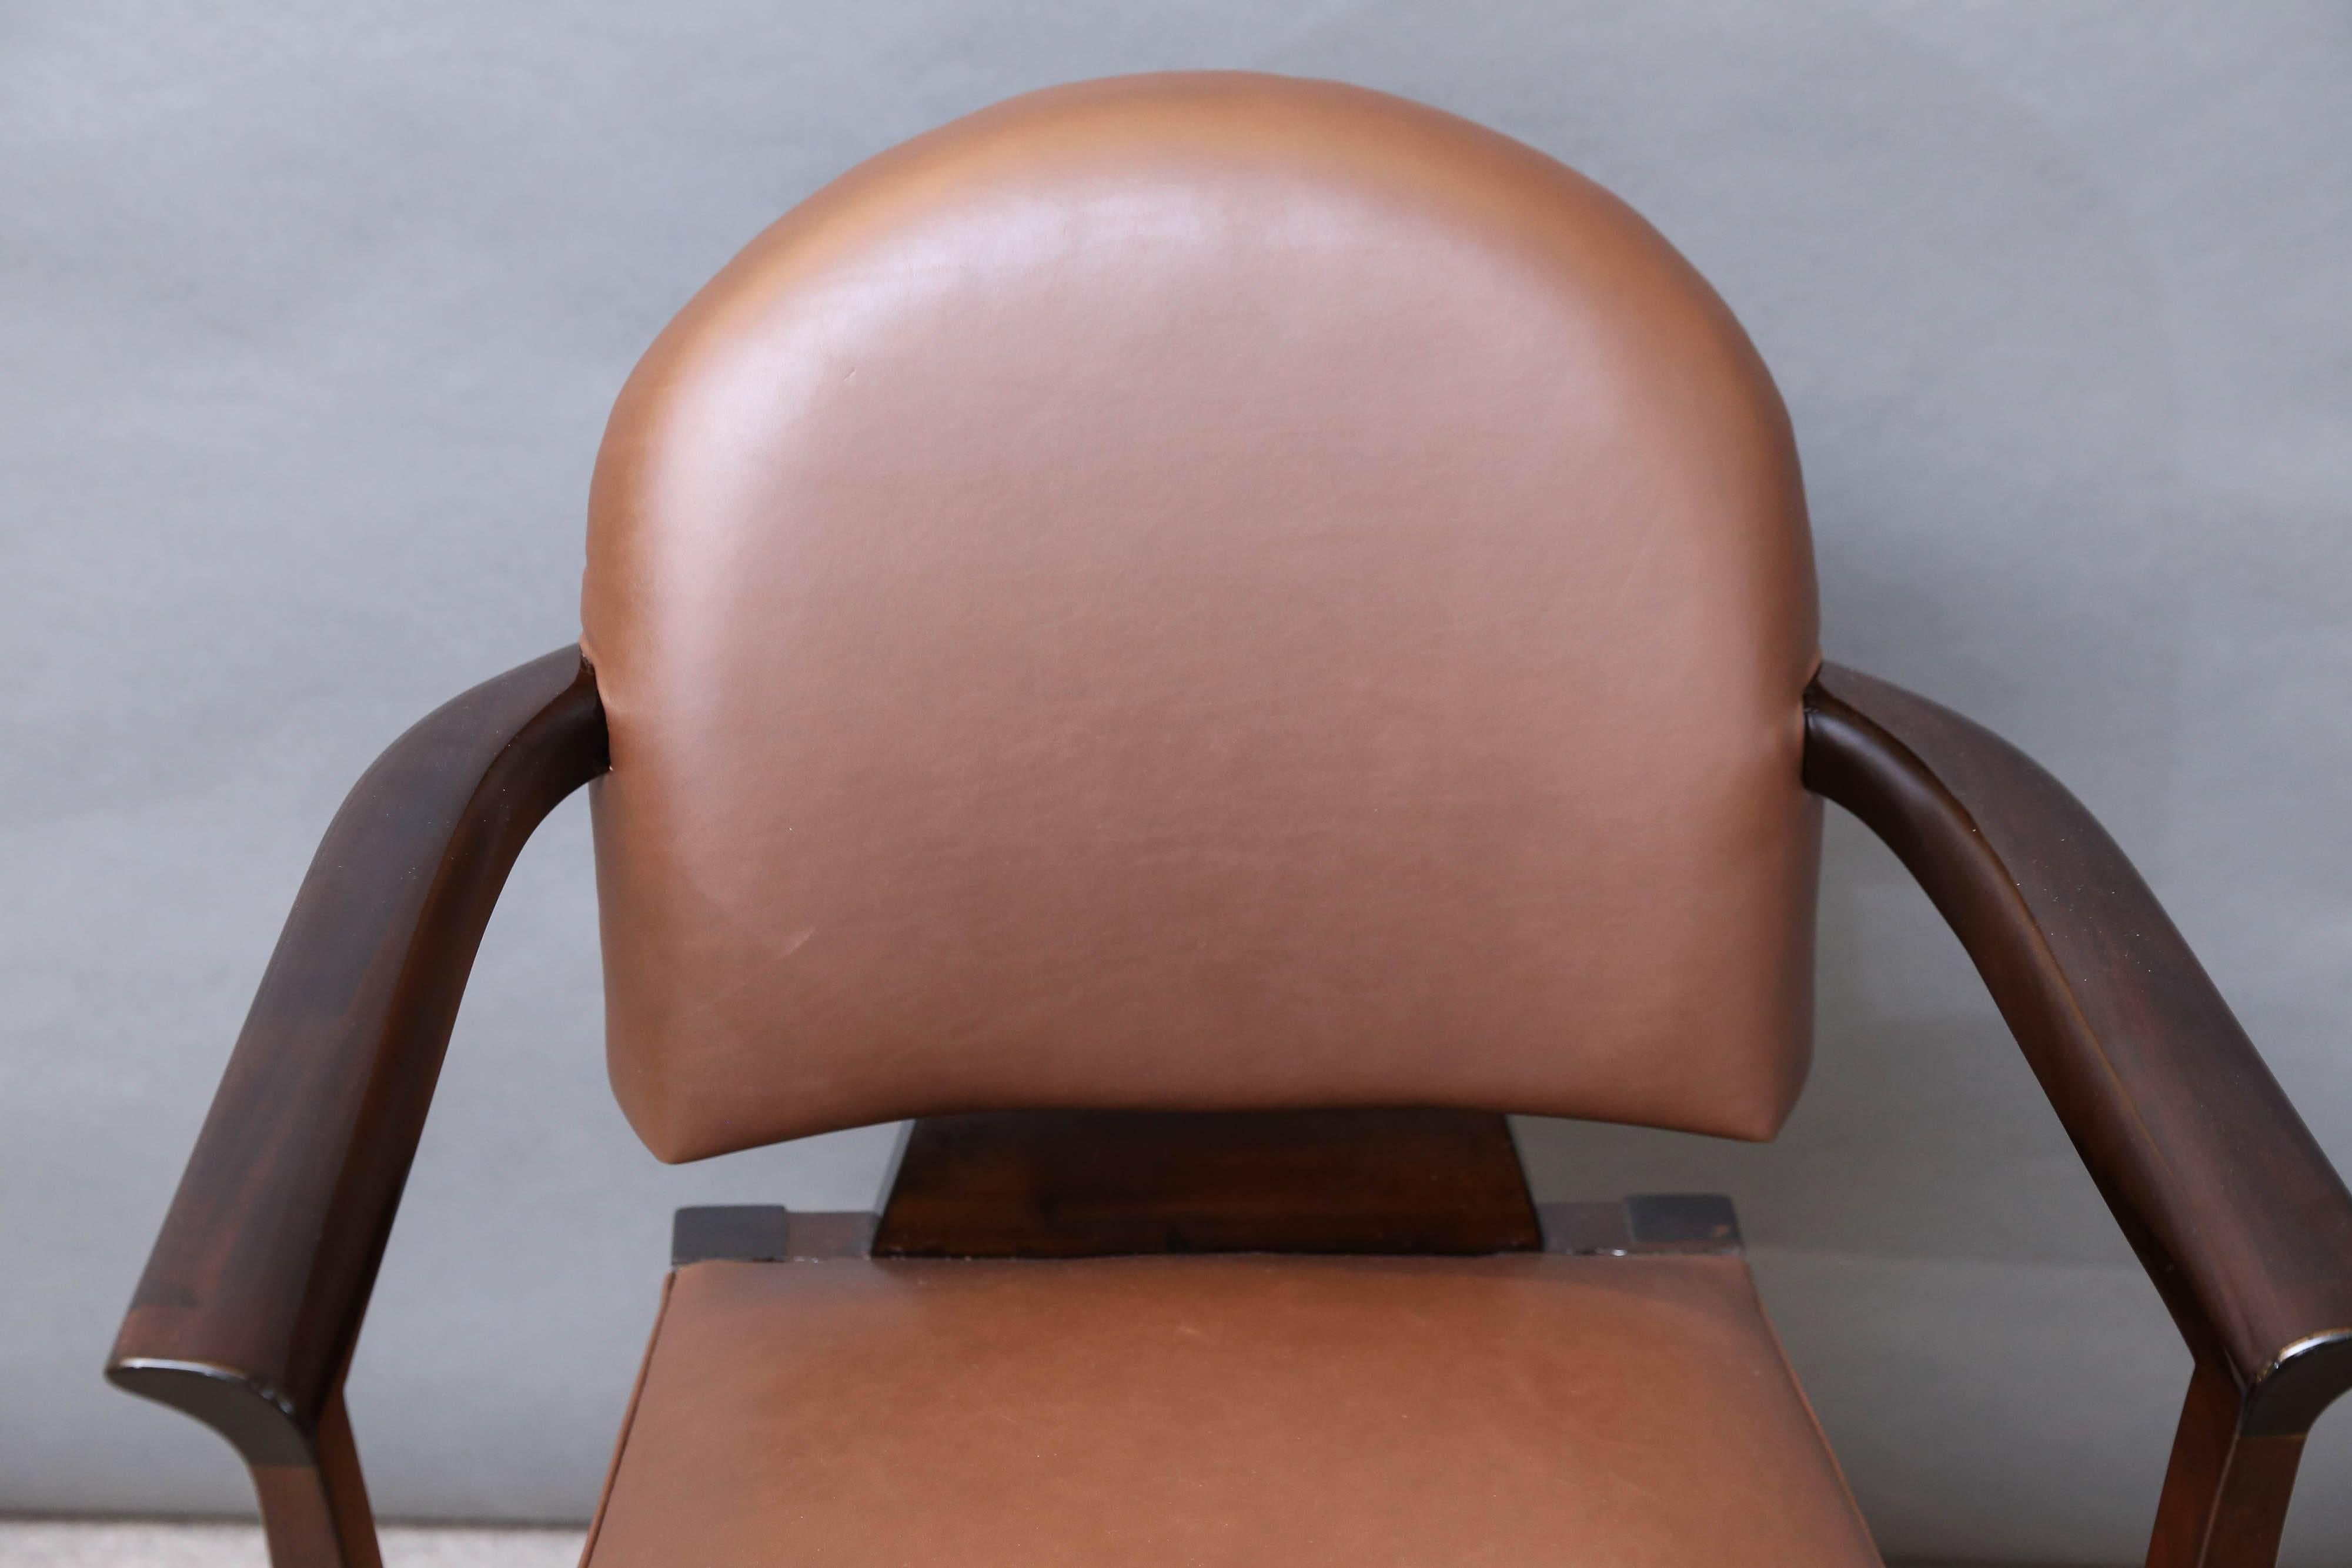 Body of the chair is made out of walnut wood. It has slick slightly curved outwards armrests. Back and sit parts are detached. They are newly re-upholstered in brown cowhide. The chair is elevated by four elongated legs. Two back legs are slightly